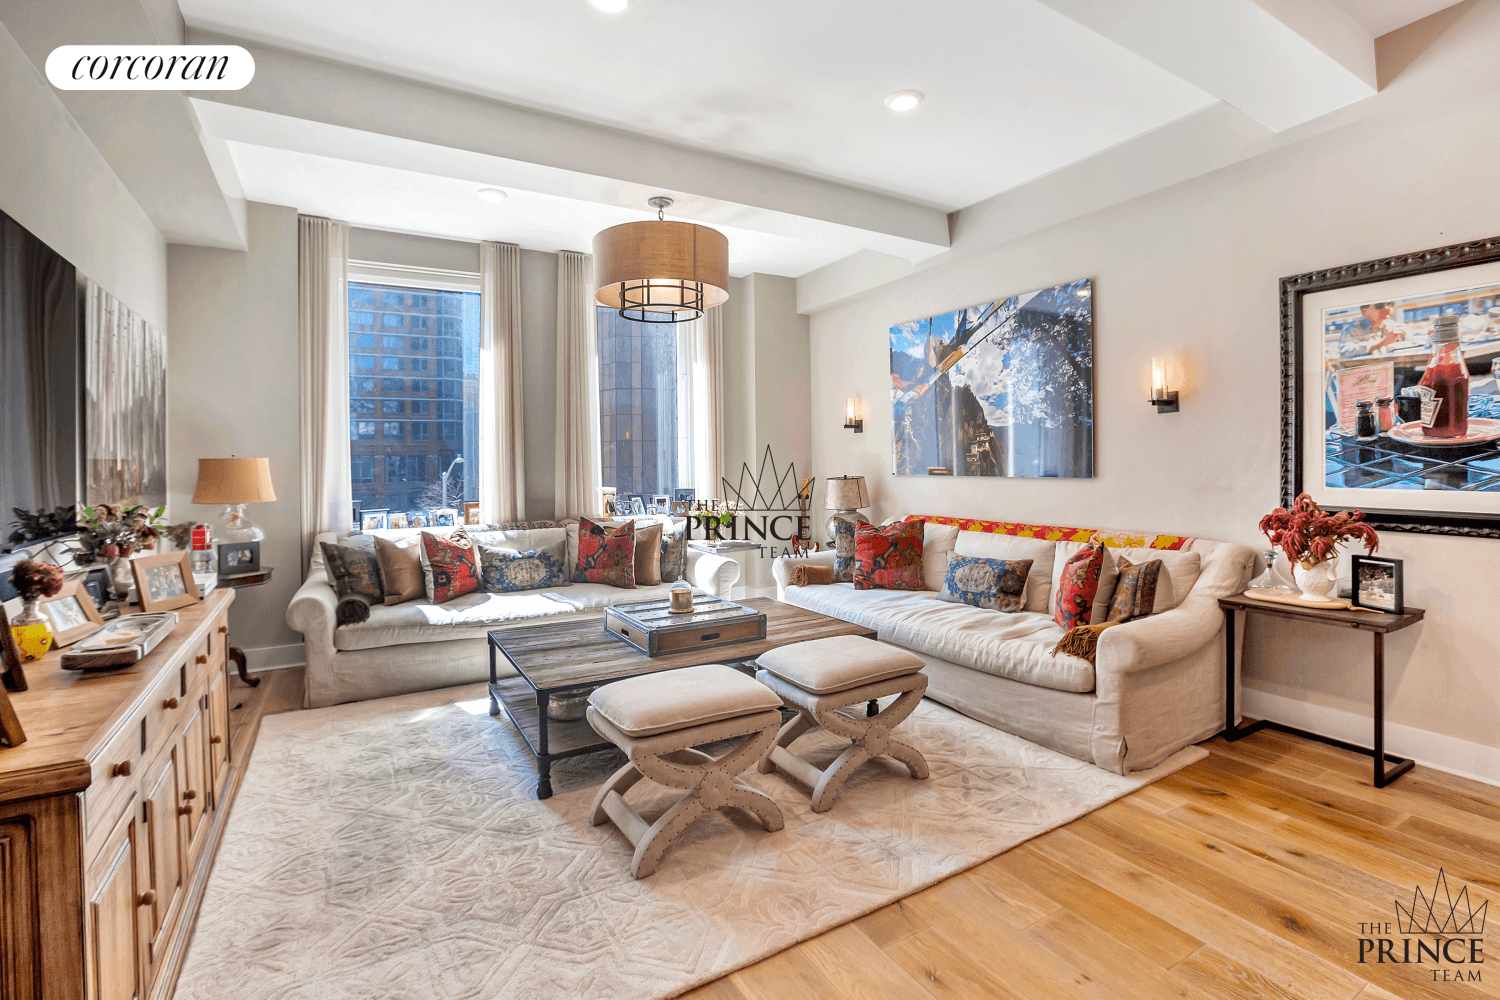 Filled with spectacular finishes and stunning views, this three bedroom, two bathroom condominium with a large private terrace is a rare find in the perfect Tribeca neighborhood.